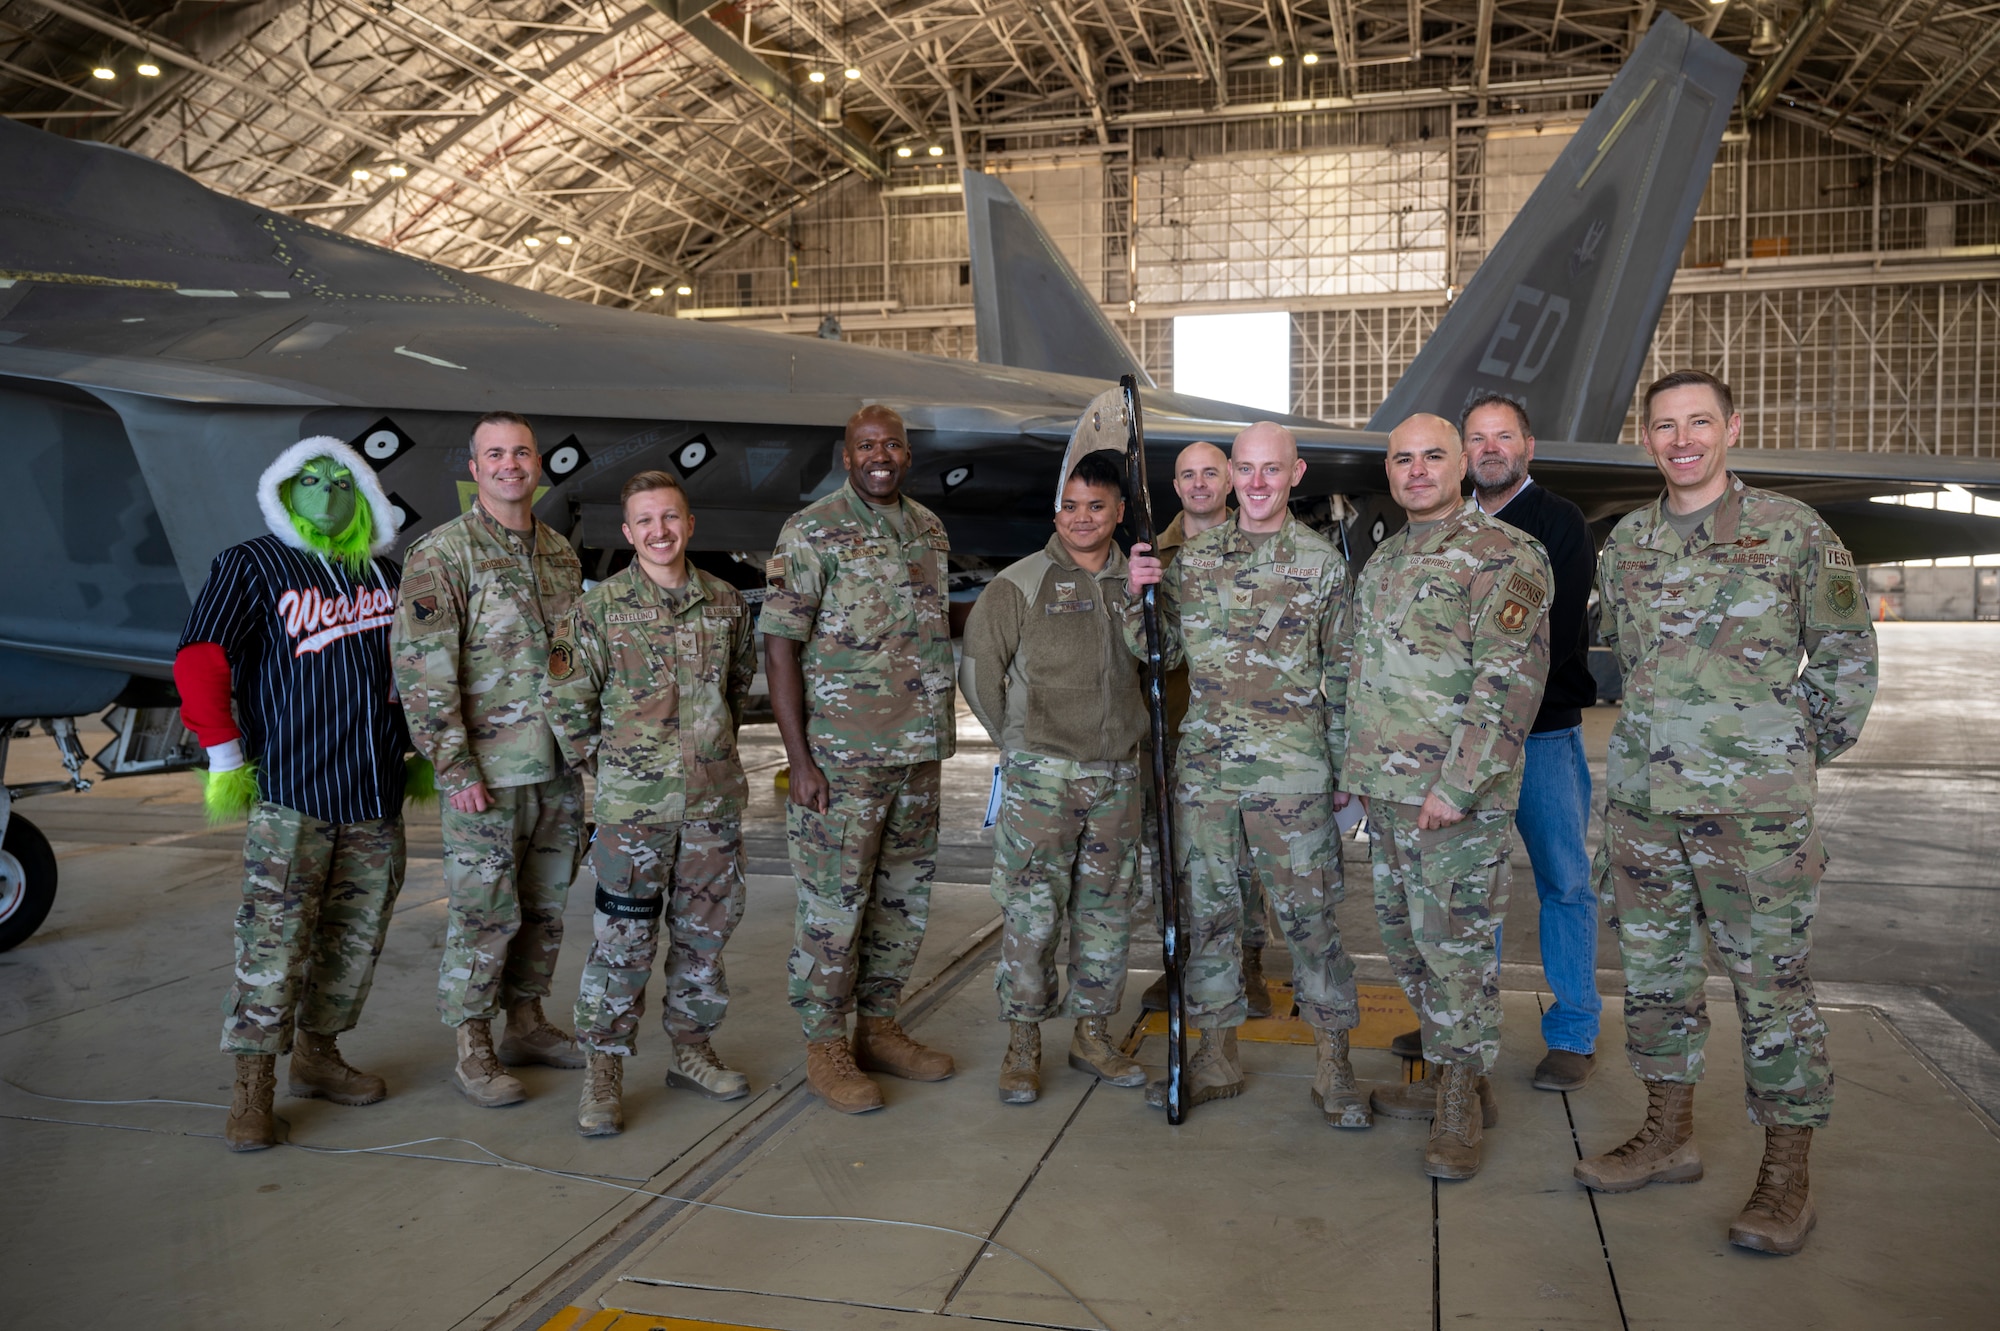 The 411th Raptor AMU wins the 3rd Quarter Weapons Load Crew of the Quarter Competition. (Pictured: Col. Matthew Caspers, Vice Commander, 412th Test Wing, Col. Ahave Brown, Commander, 412th Maintenance Group)